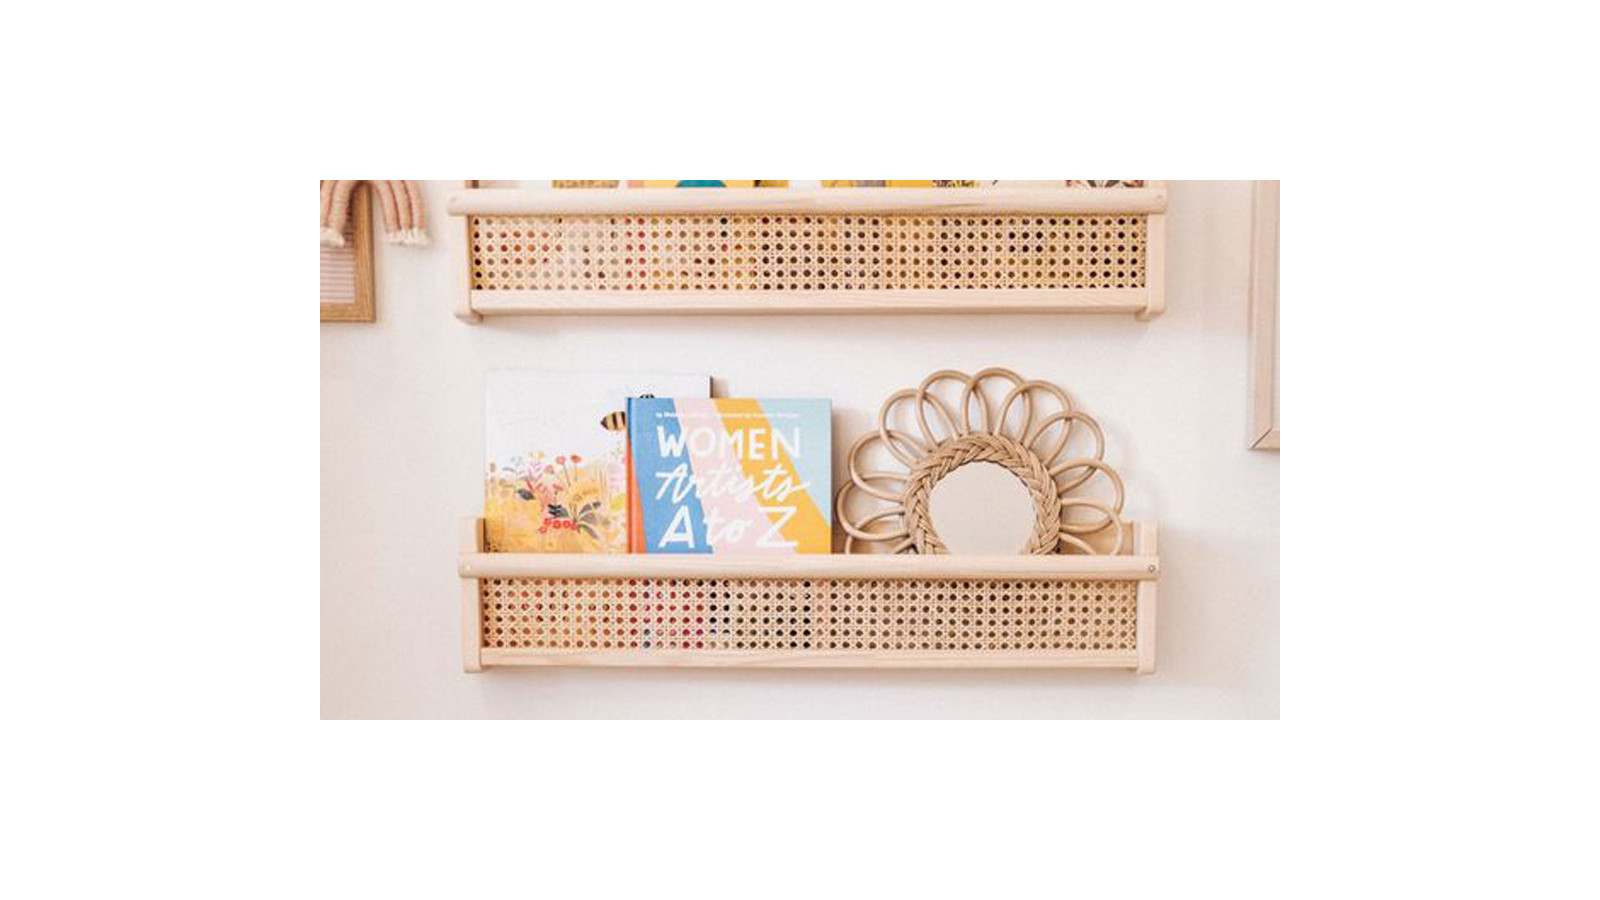 Shelves for a child's room : do you really need it? This will help you decide!